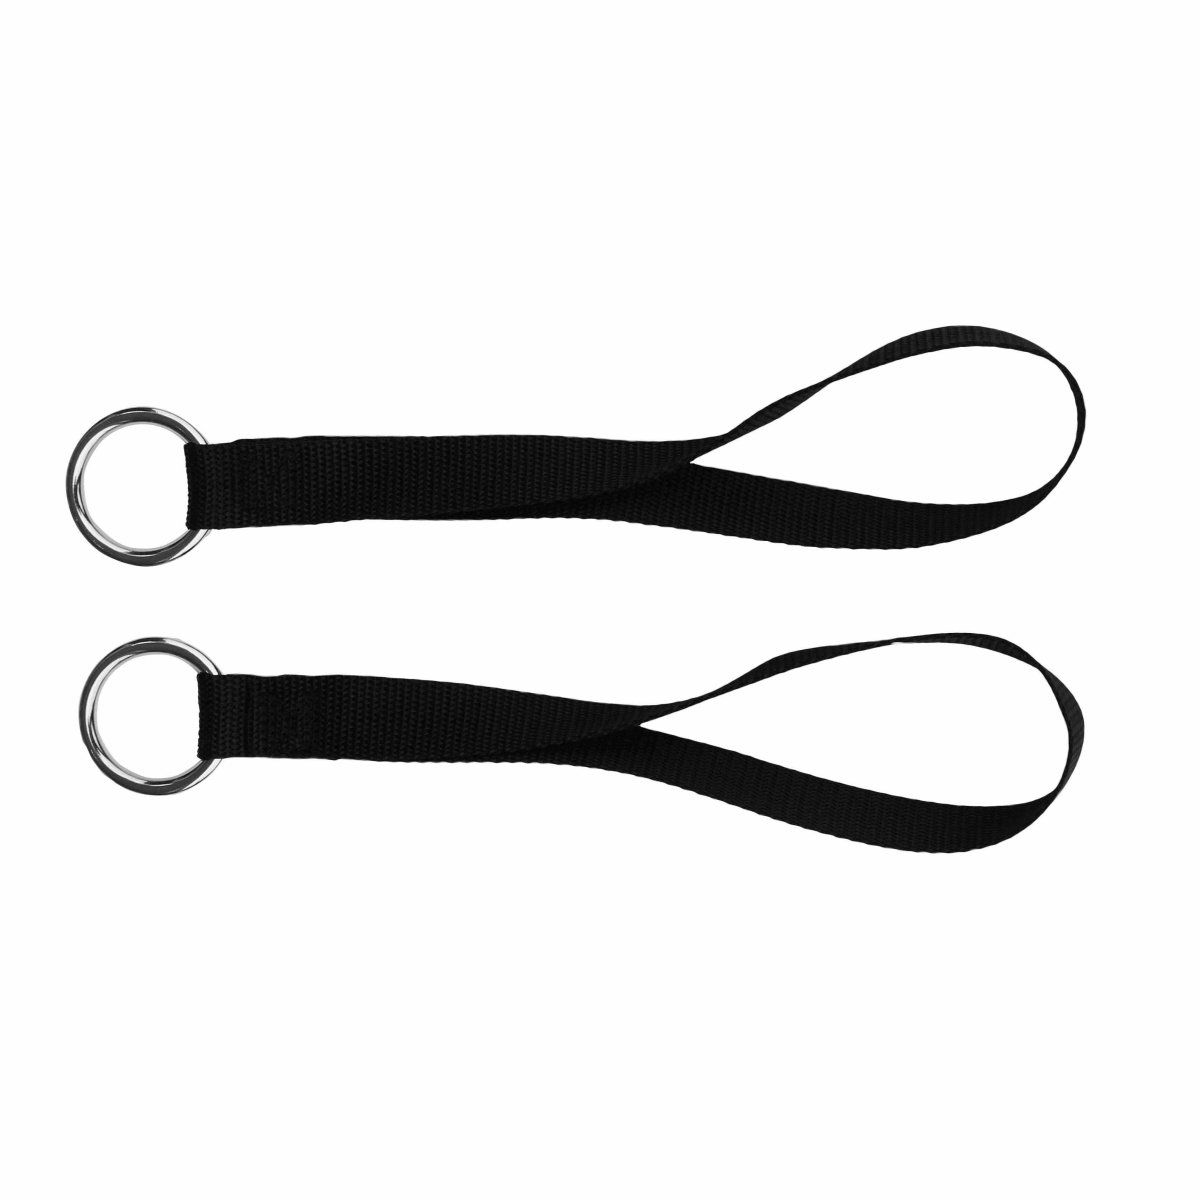 Sculpting Band Wrist/Foot Straps-FitCord Resistance Bands